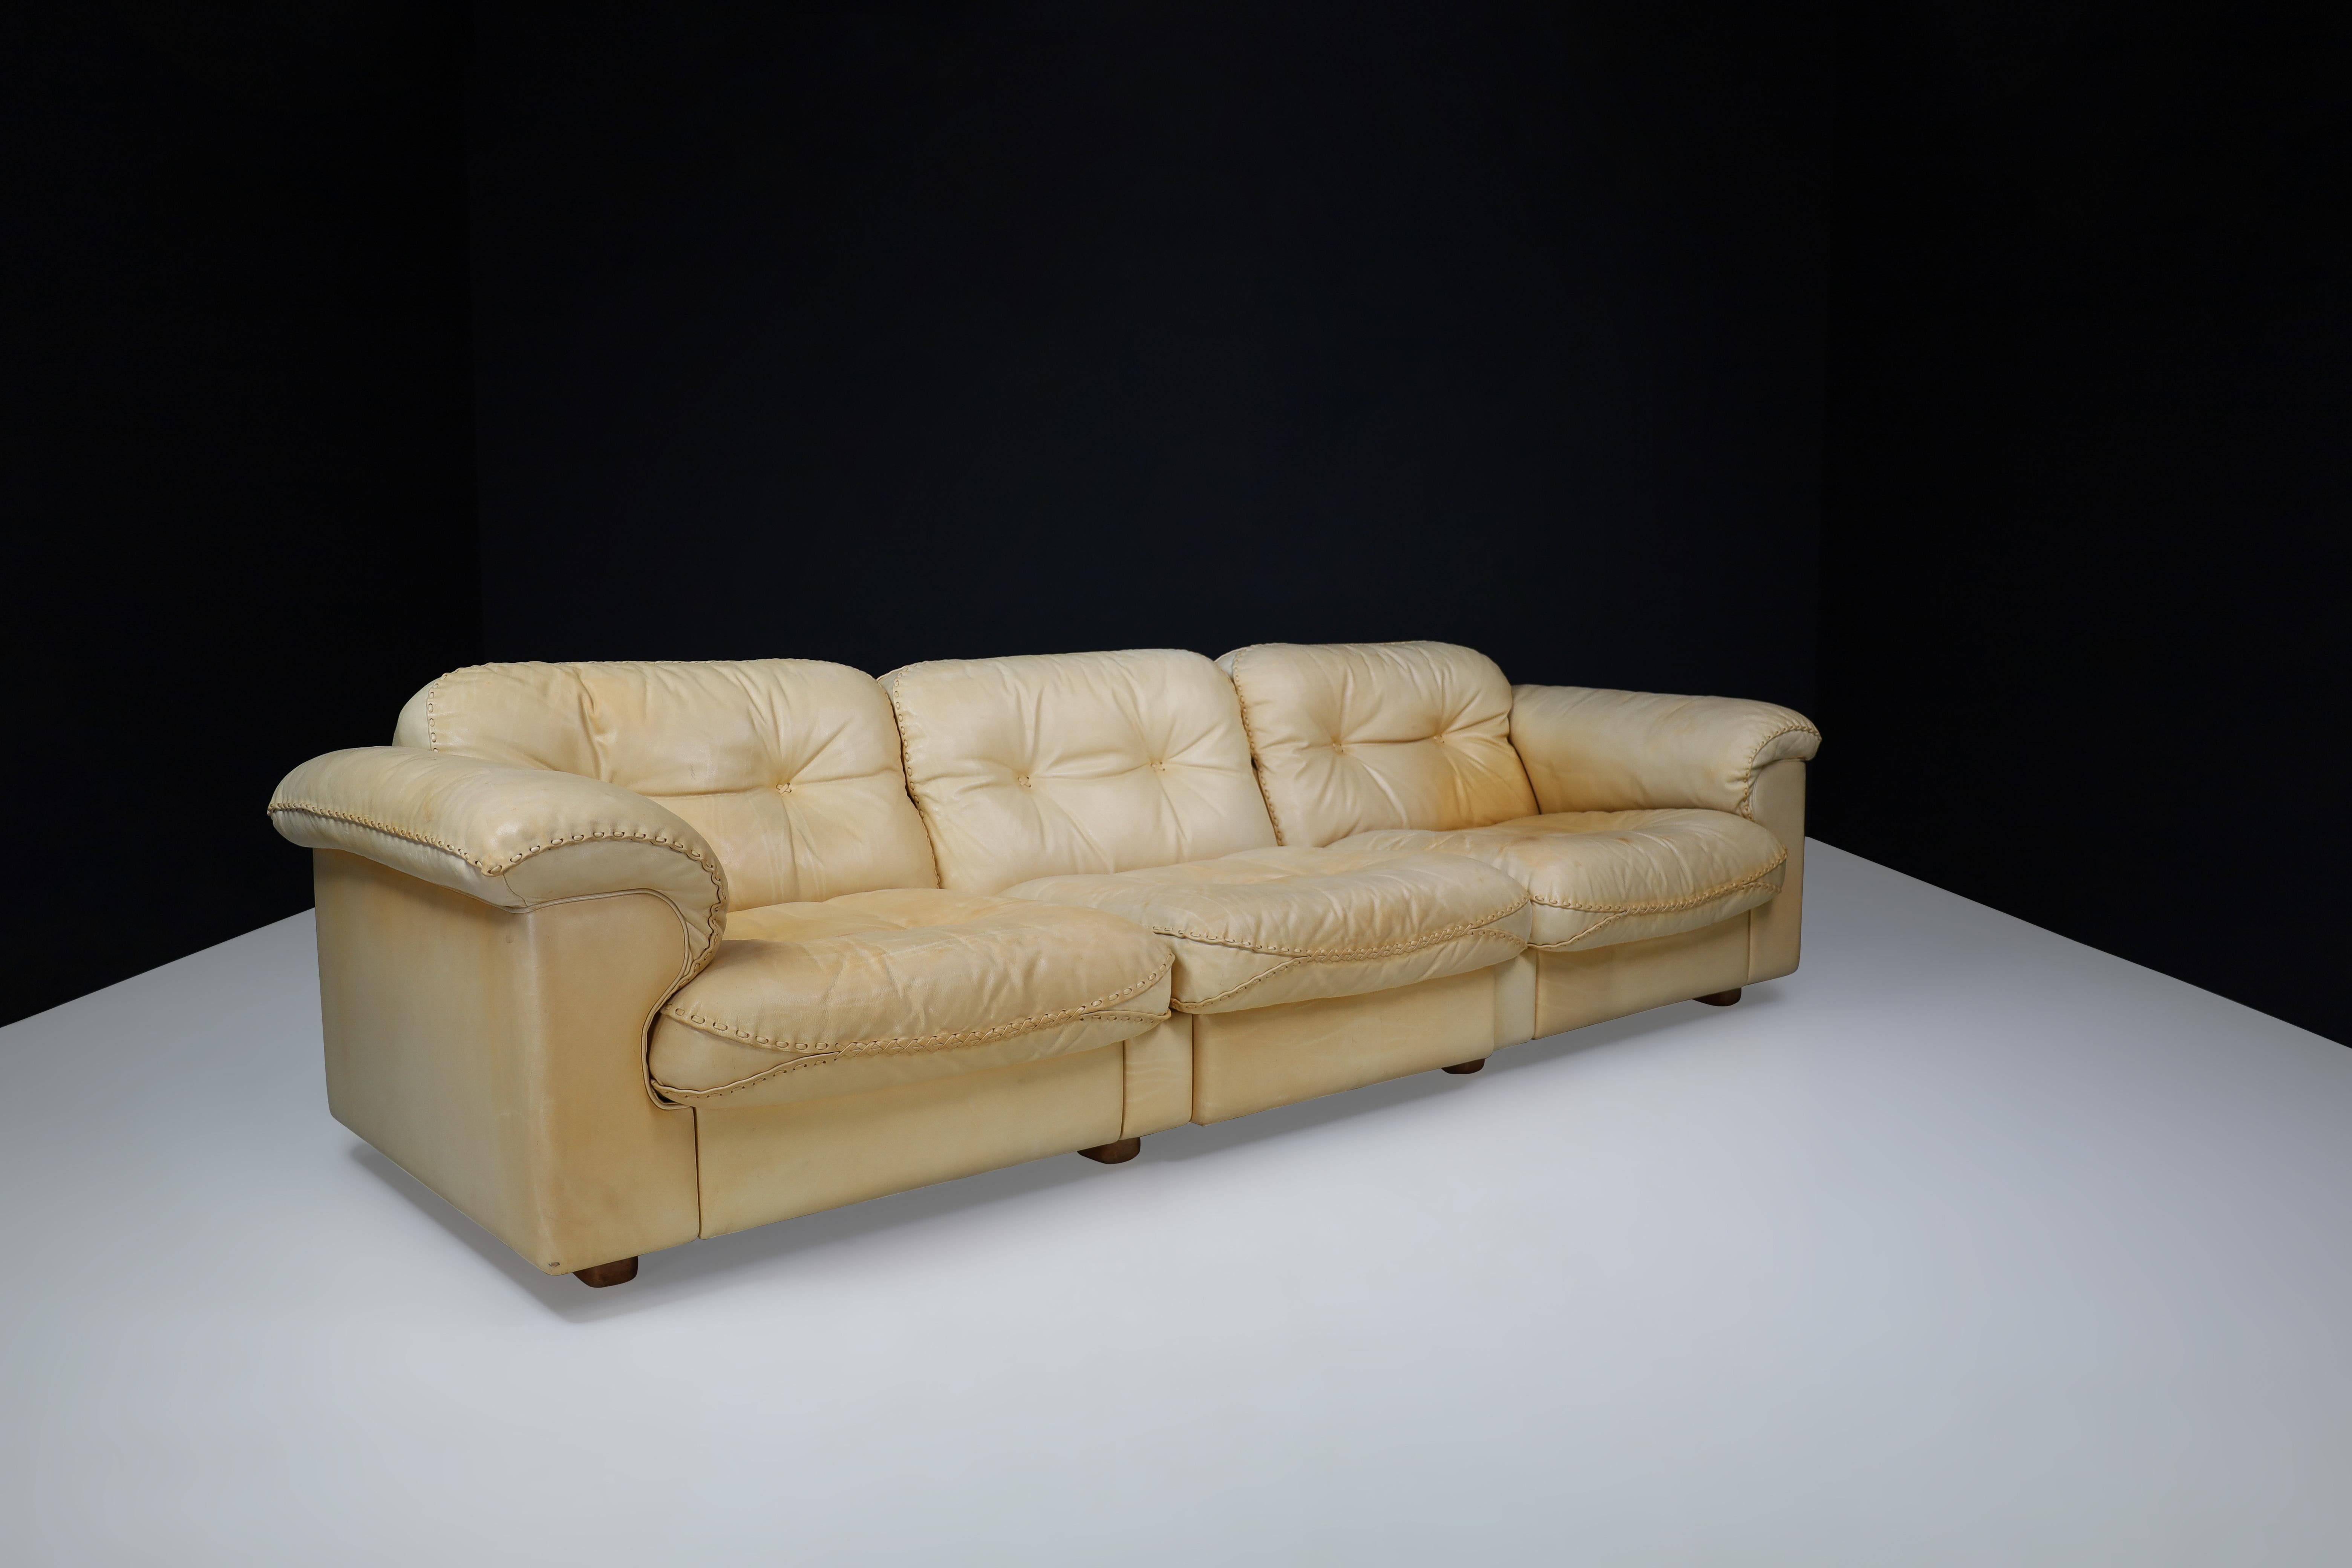 Swiss De Sede DS-101 Leather Three-Seater Sofa, Switzerland, 1960s For Sale